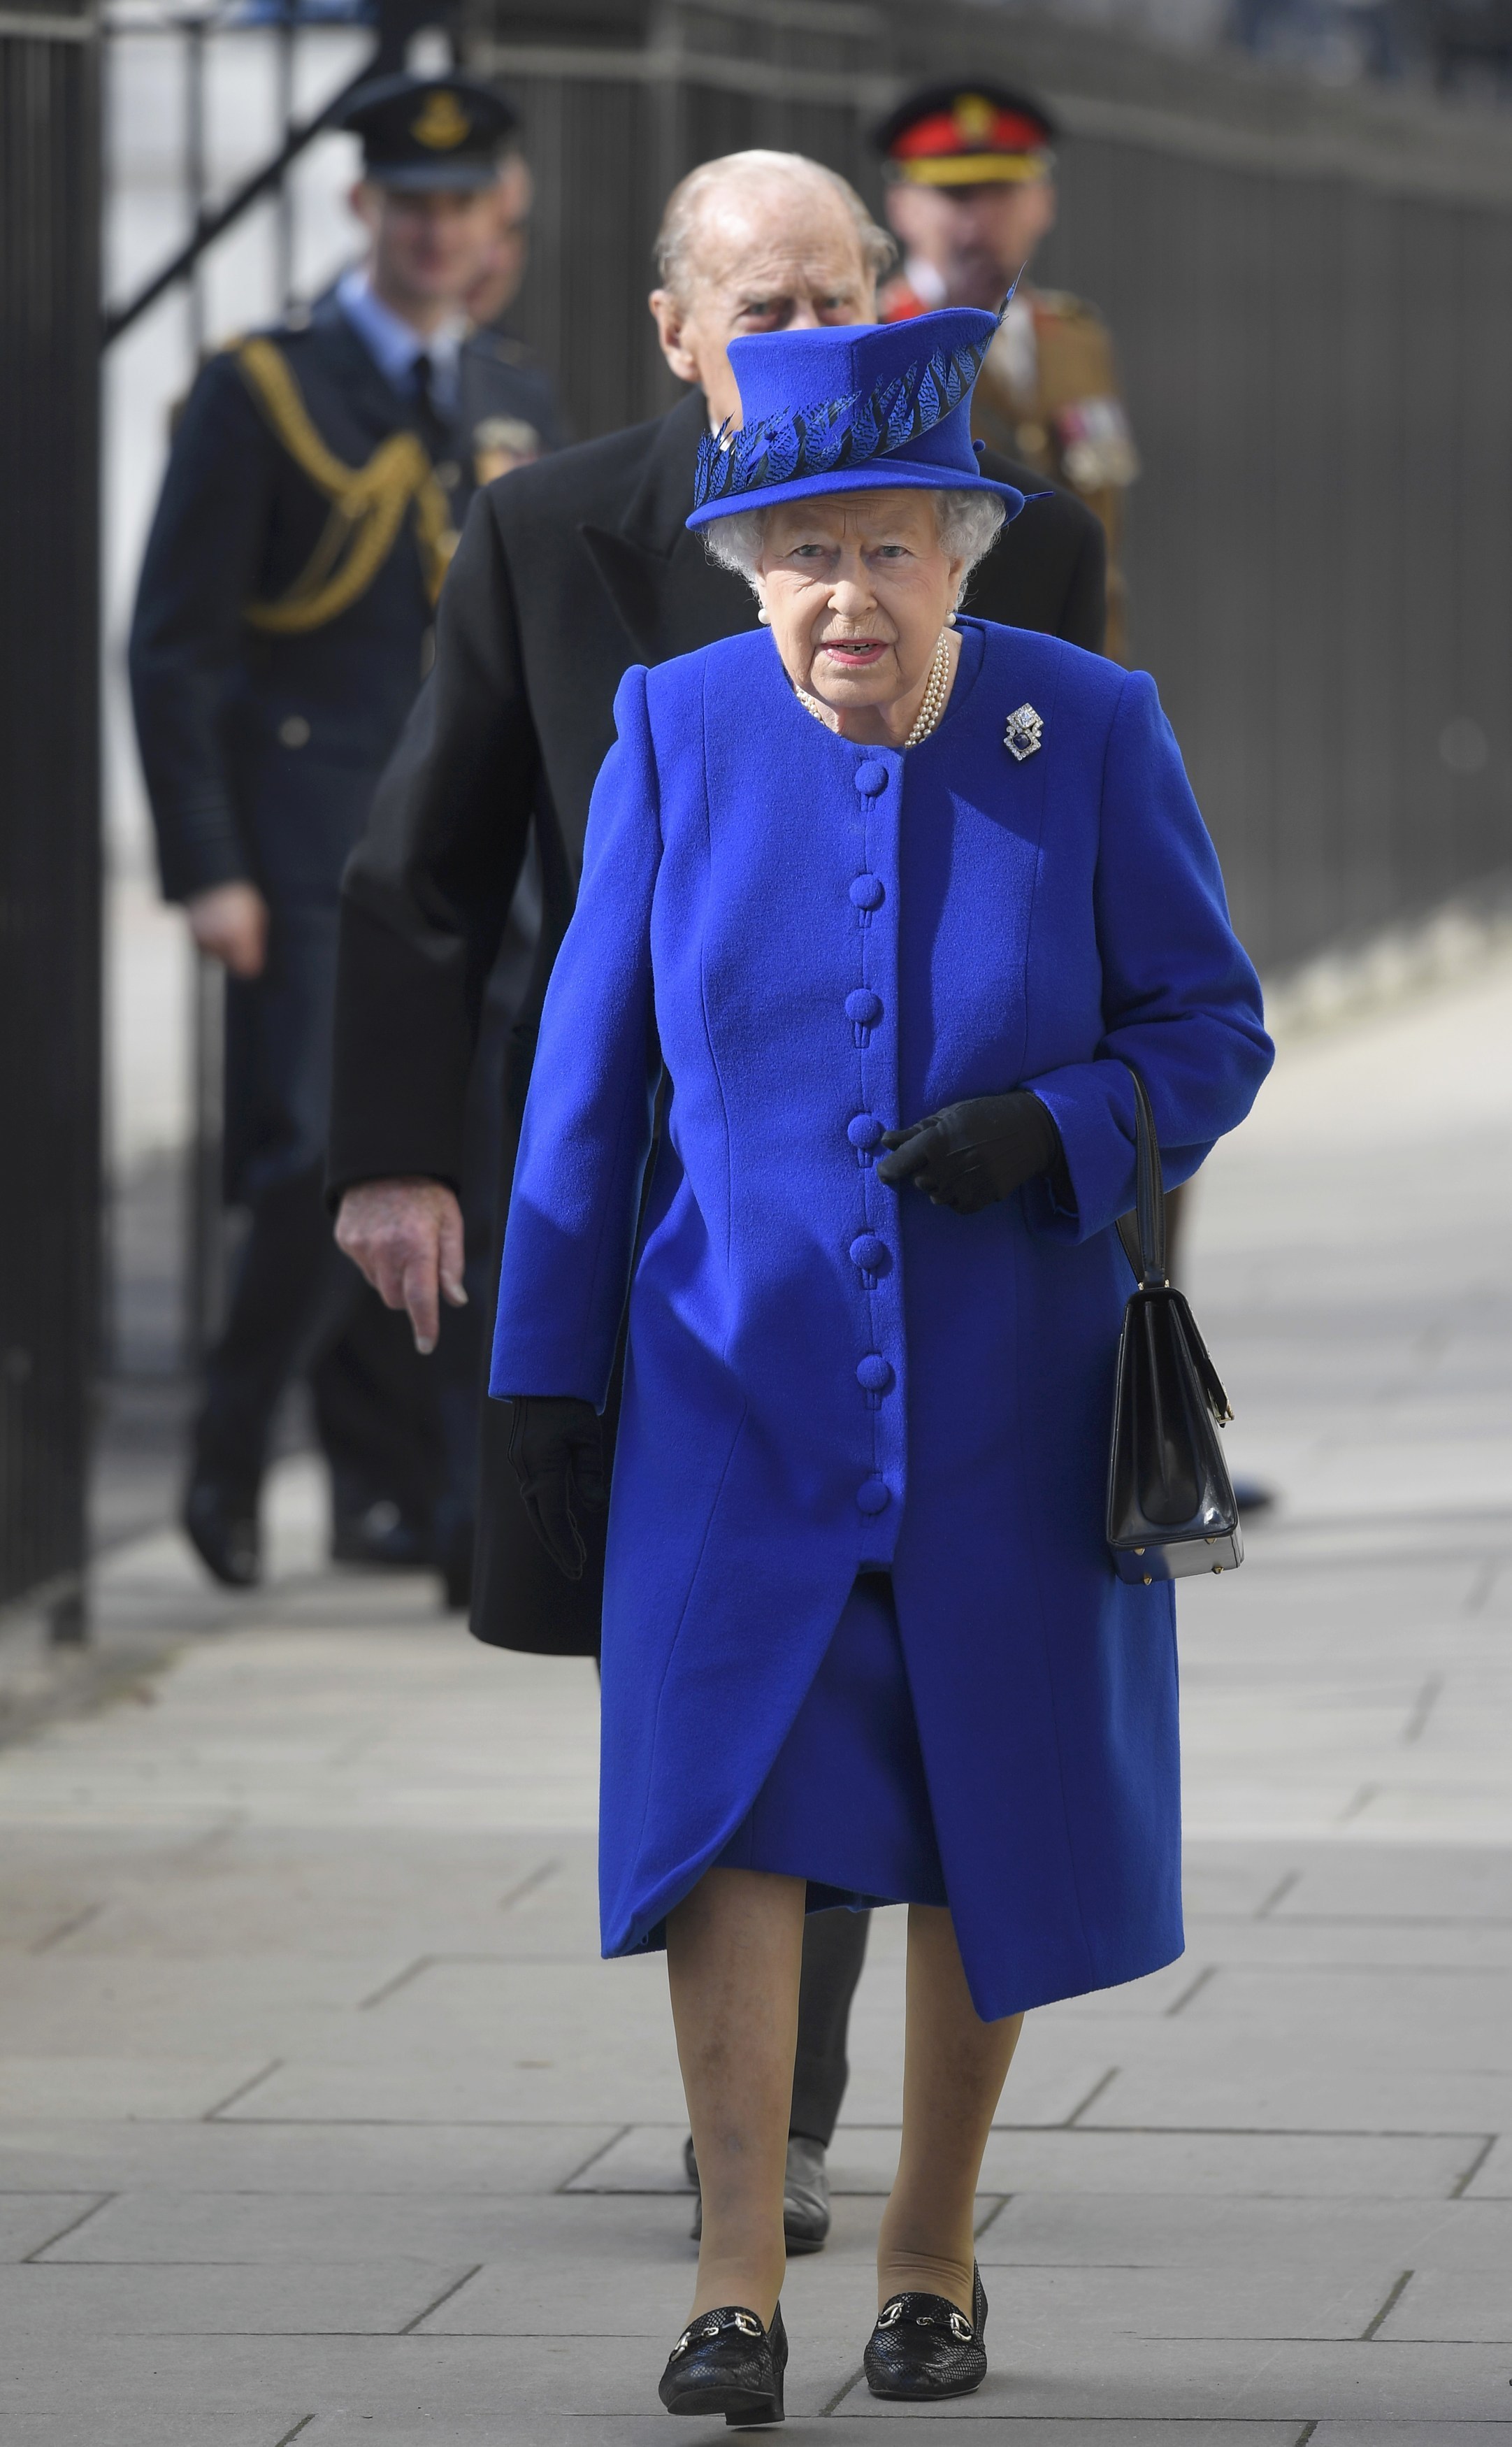 Queen Elizabeth II at the unveiling of a new Iraq and Afghanistan memorial